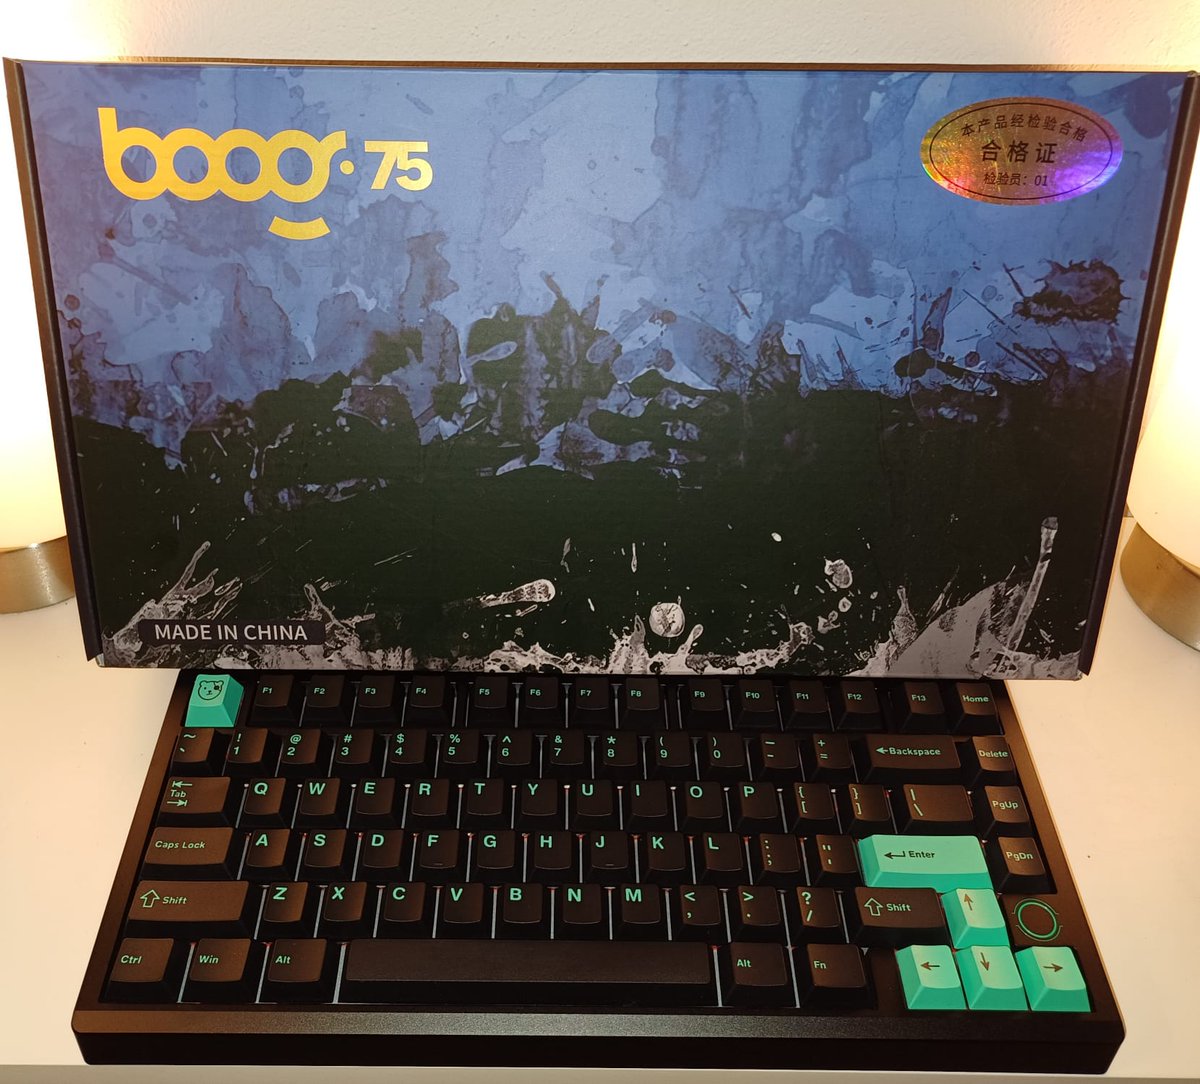 Big shoutout to @ShawnShawnTW for the Meletrix BOOG75 TKL keyboard. Has the new Rapid Trigger technology and the clicks sound amazing straight out the box. Real contender with the Wooting 60HE. especially if you prefer TKL over 60%